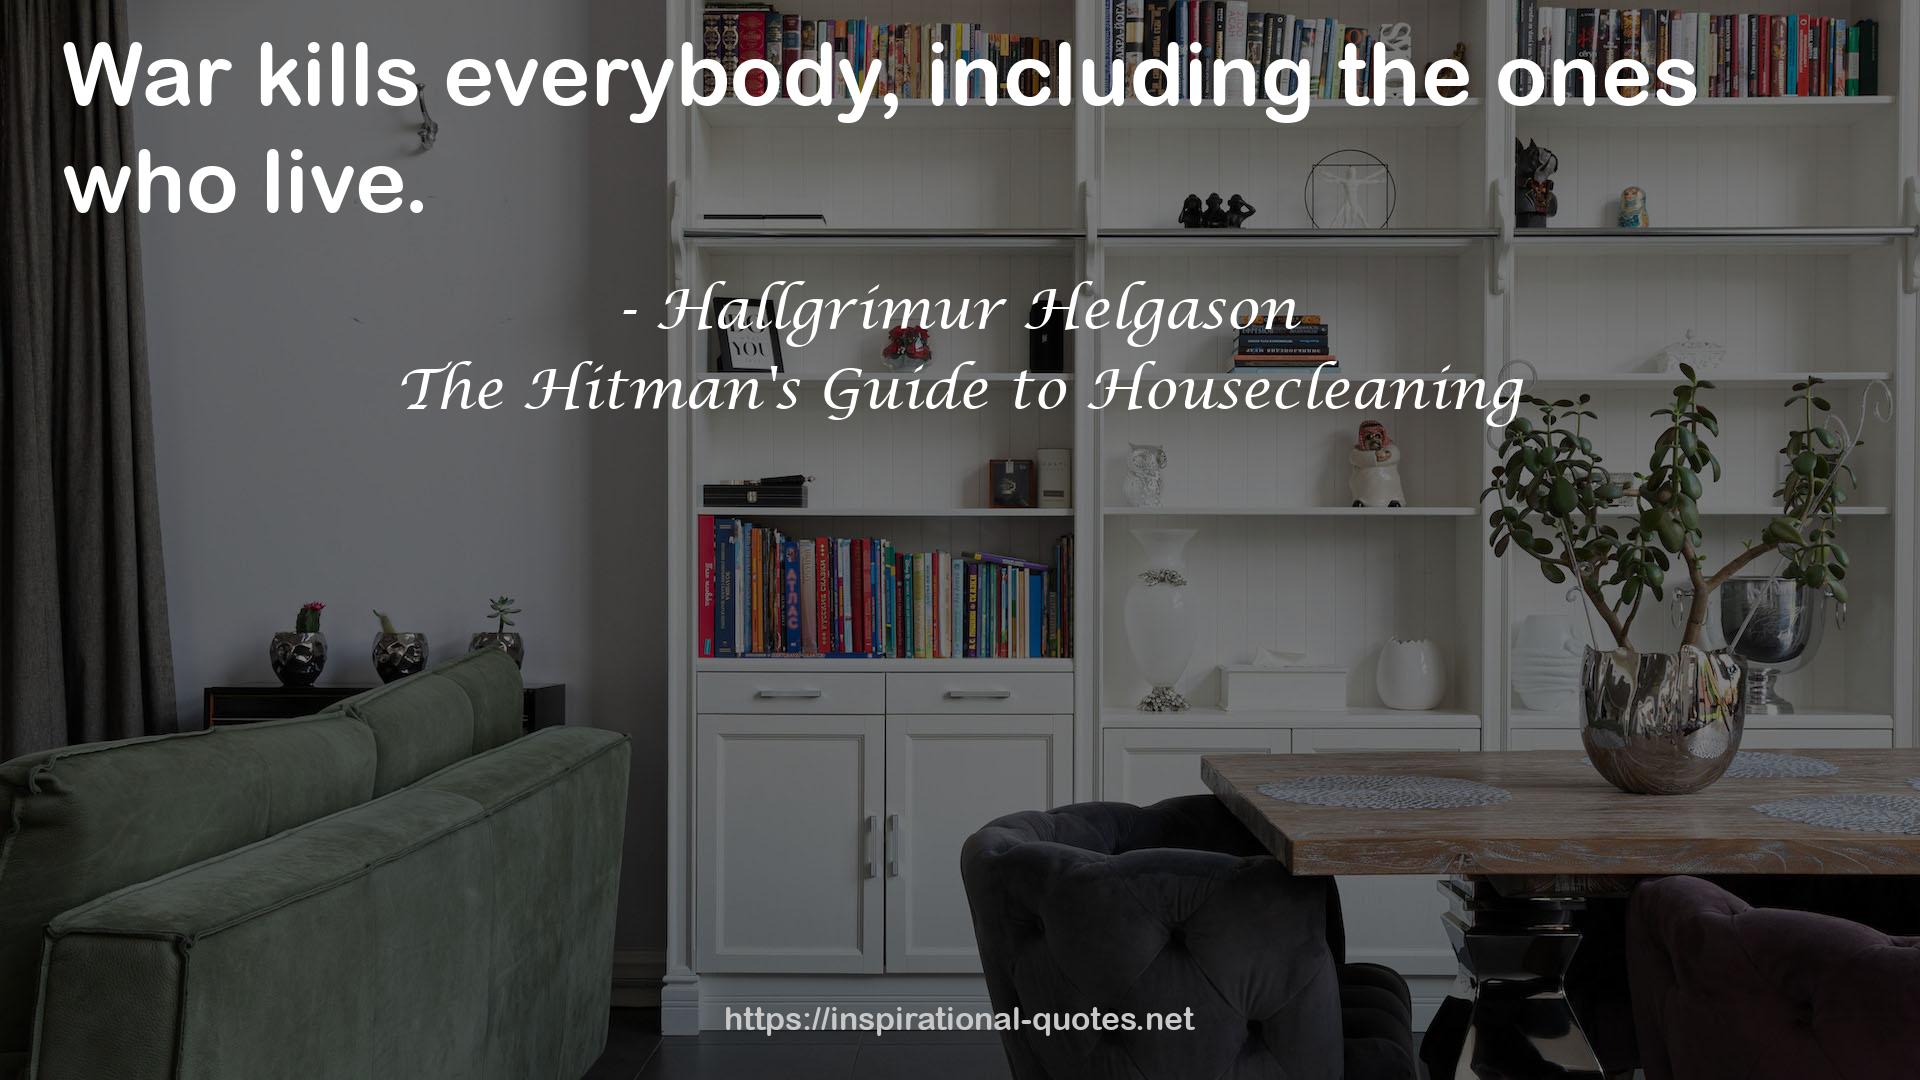 The Hitman's Guide to Housecleaning QUOTES